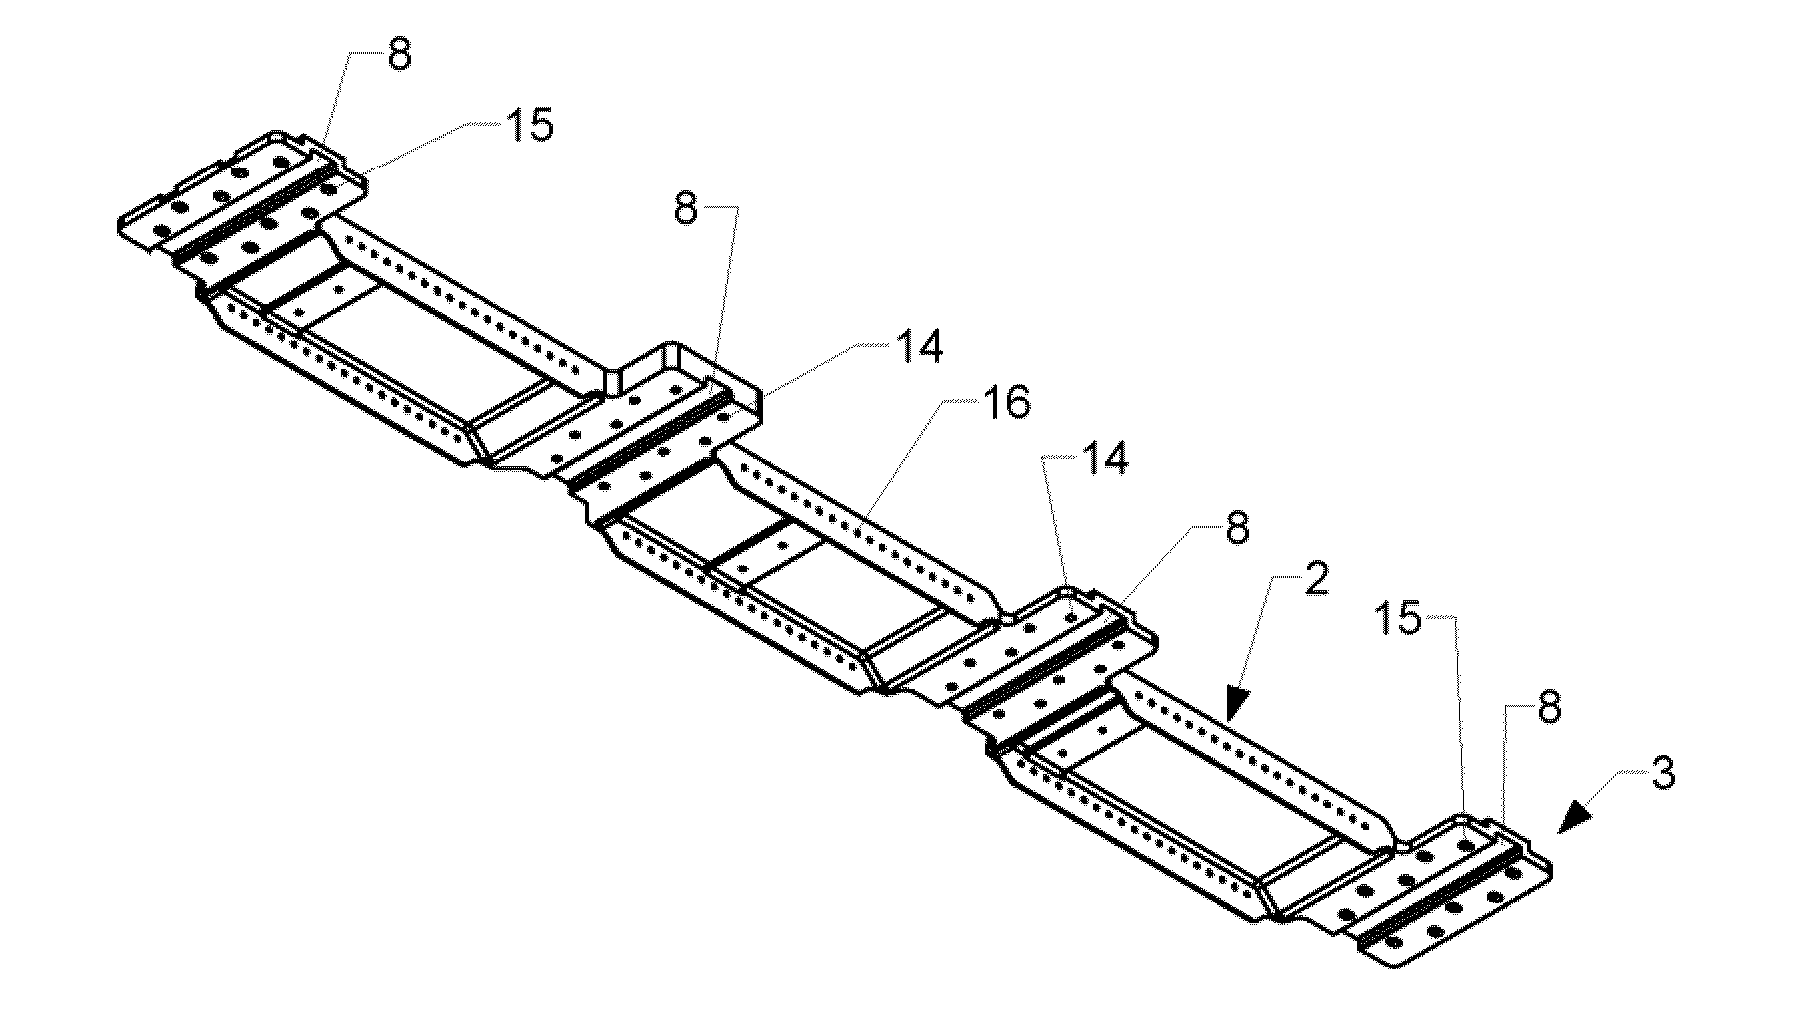 Adapter plate for airplane structure